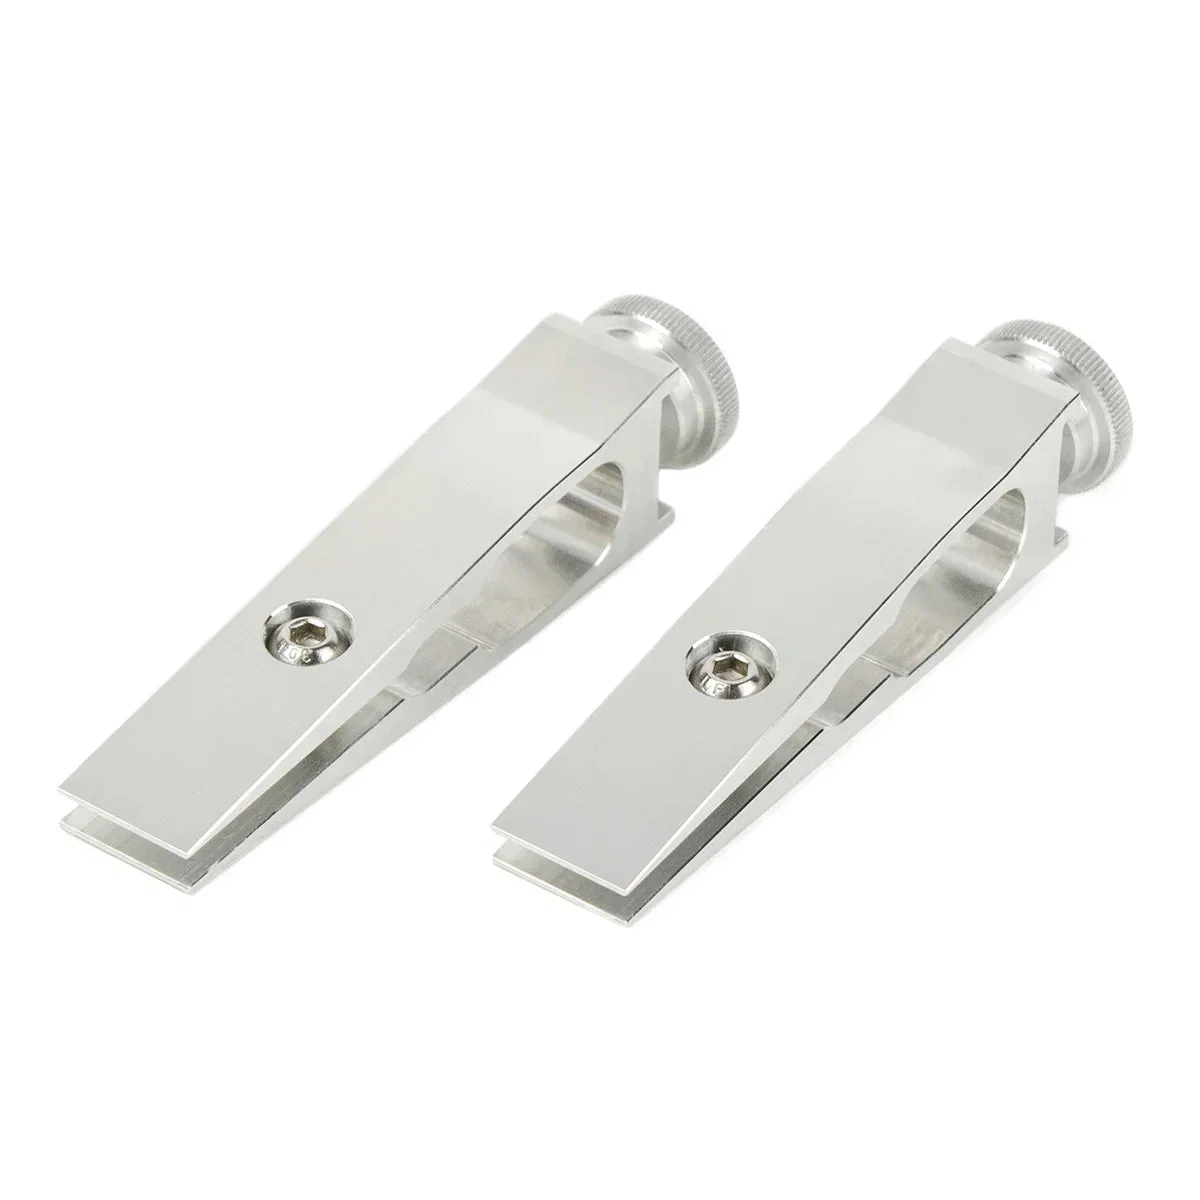 Will these fillet clamps work for small knives?